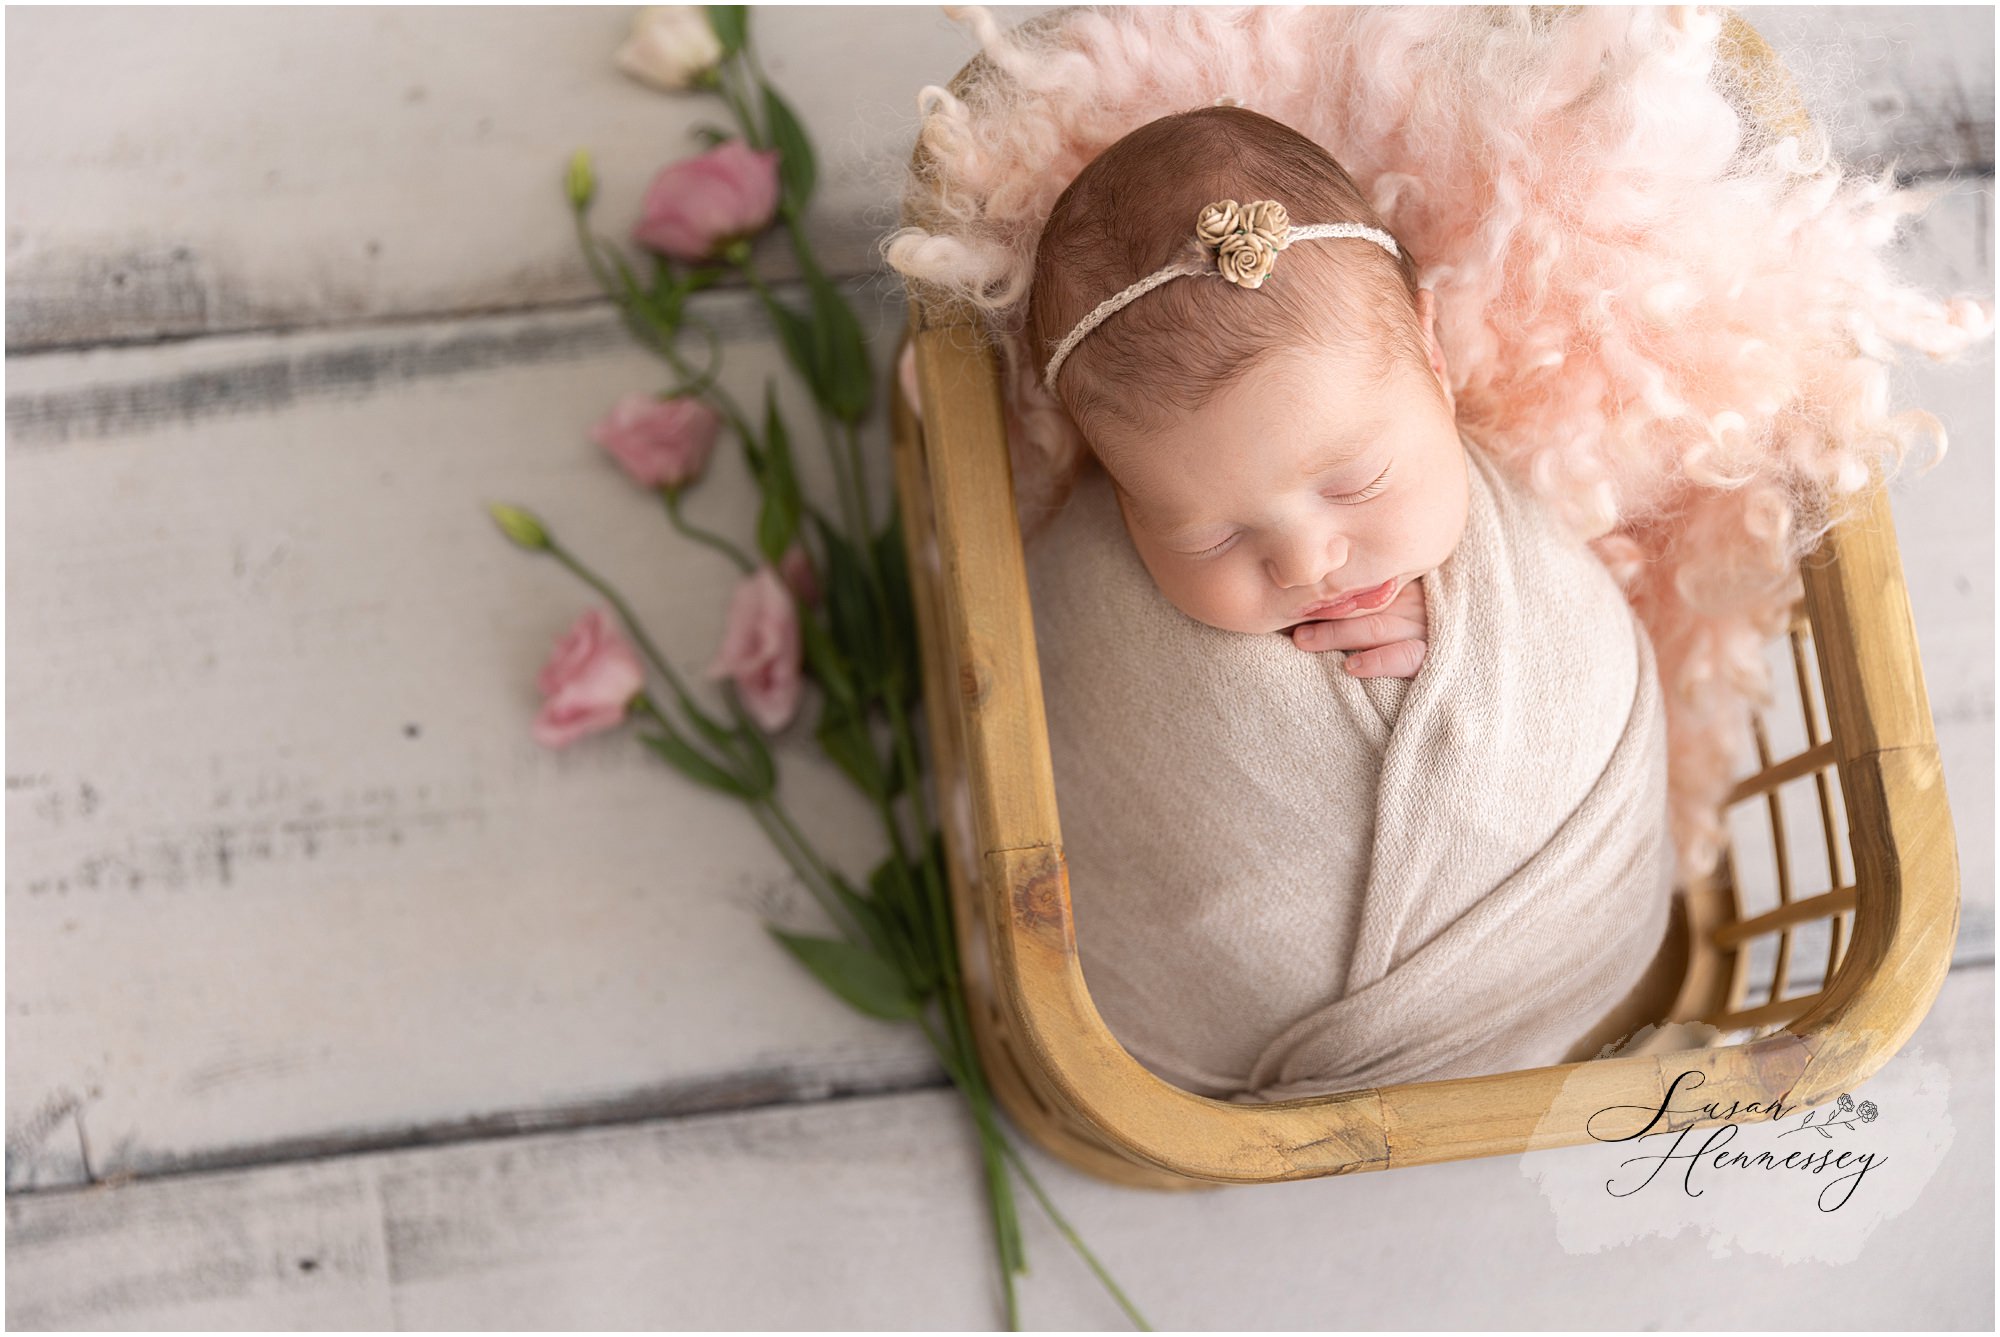 Susan Hennessey Photography is a south jersey newborn photographer with a studio in Moorestown, NJ